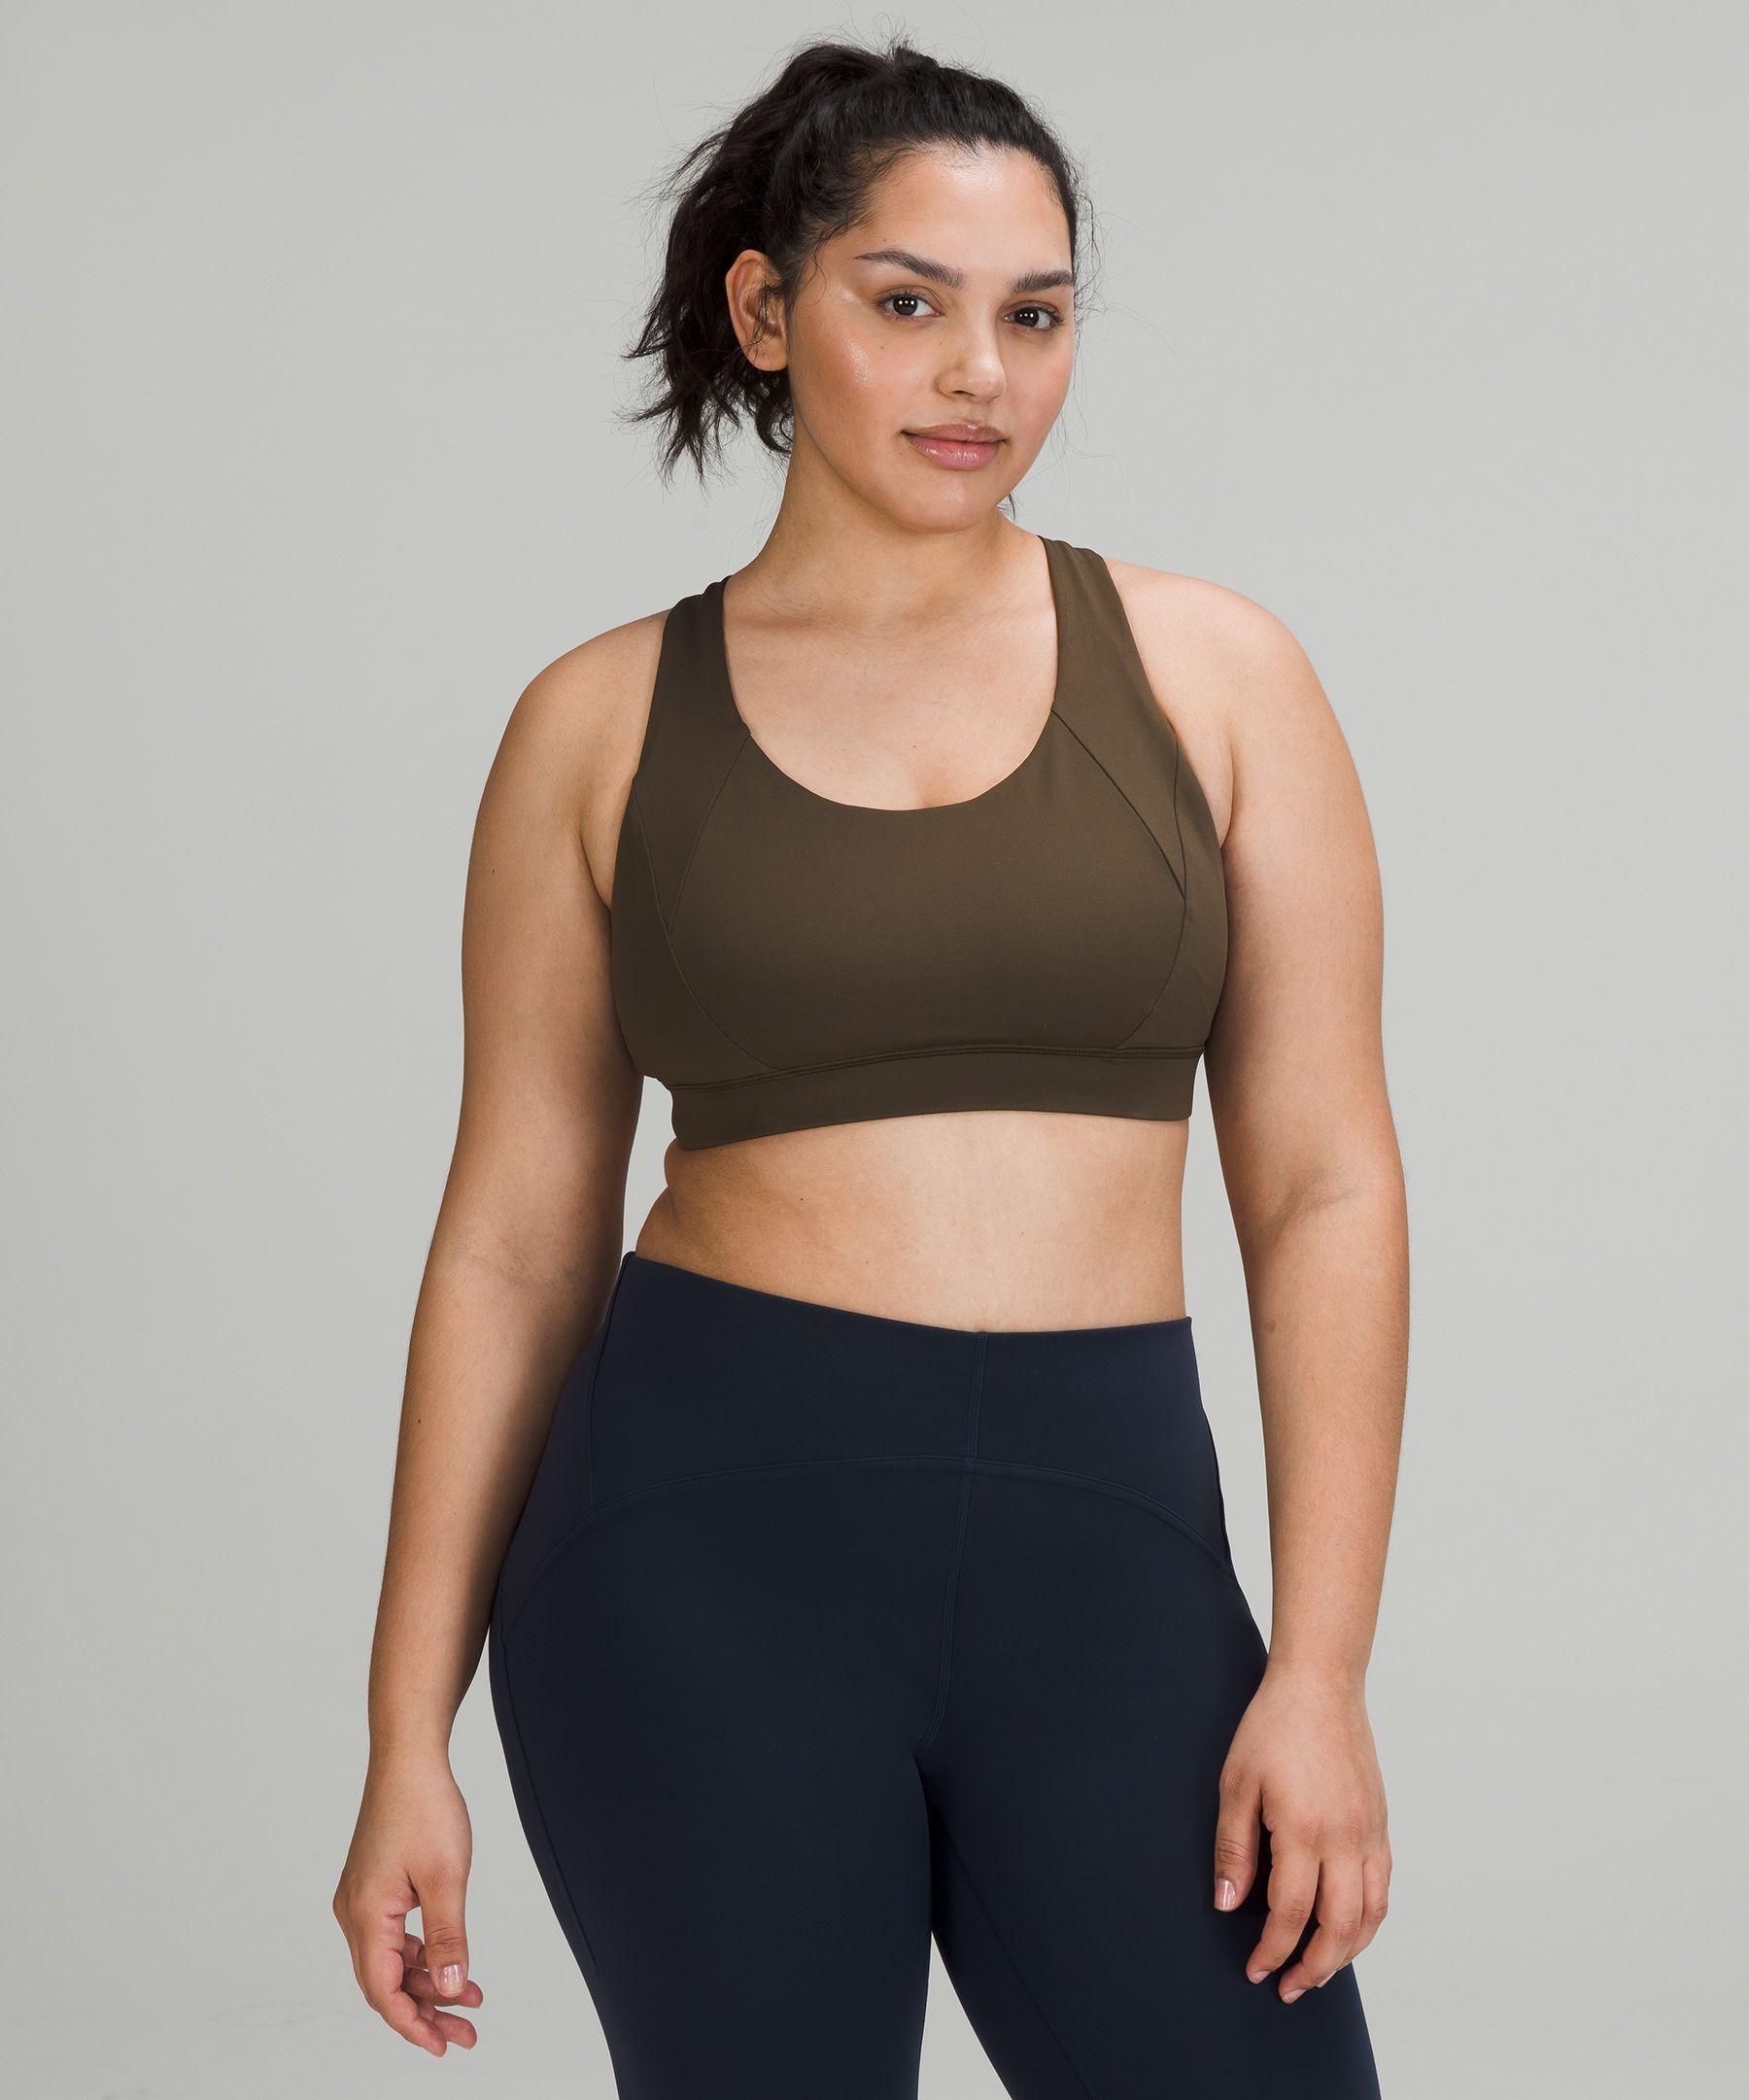 Lululemon Free To Be Elevated Bra Light Support, Dd/ddd(e) Cup In Dark Olive